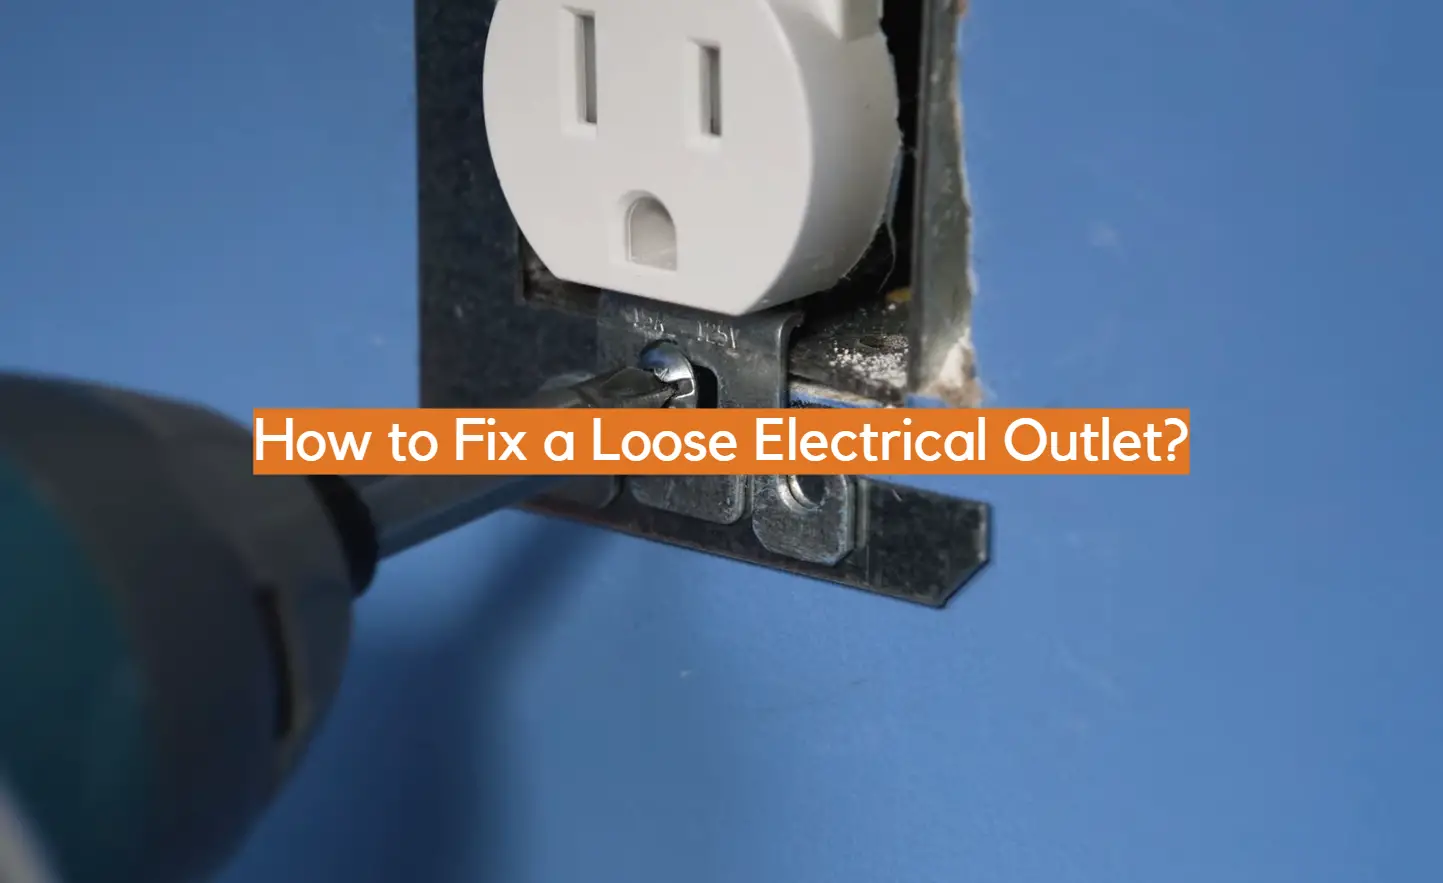 How to Fix a Loose Electrical Outlet?